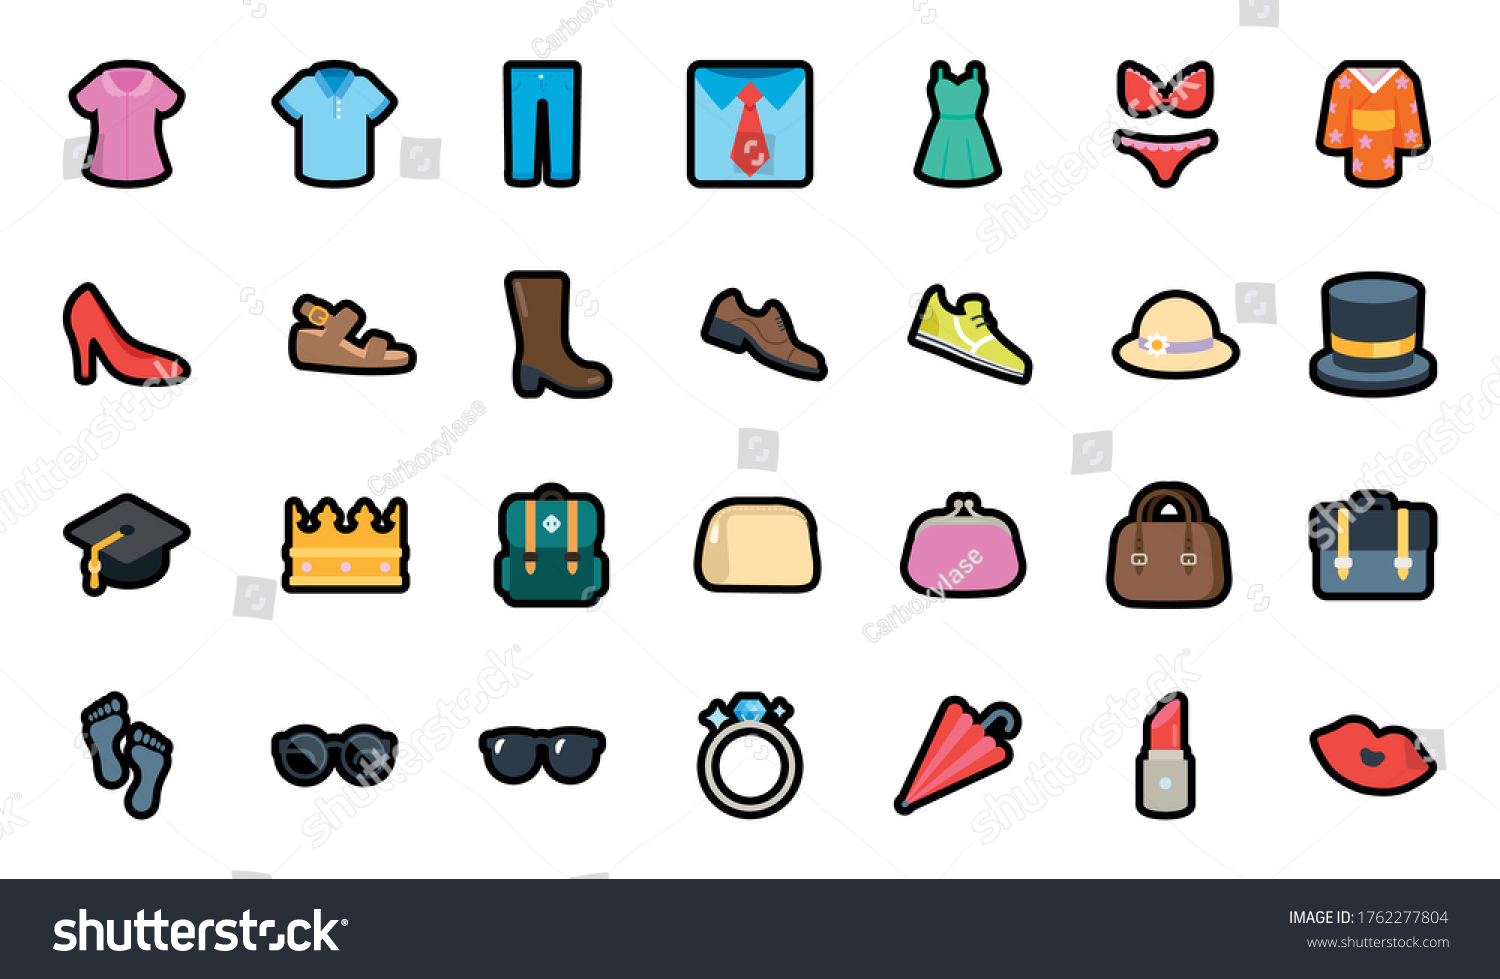 SVG of All Clothes Vector Icons Set. Shopping Emojis Collection. Menswear, Womenswear, Accessories, Ring, Hat, Shirts, Wears, Apparels, Dresses Illustrations svg